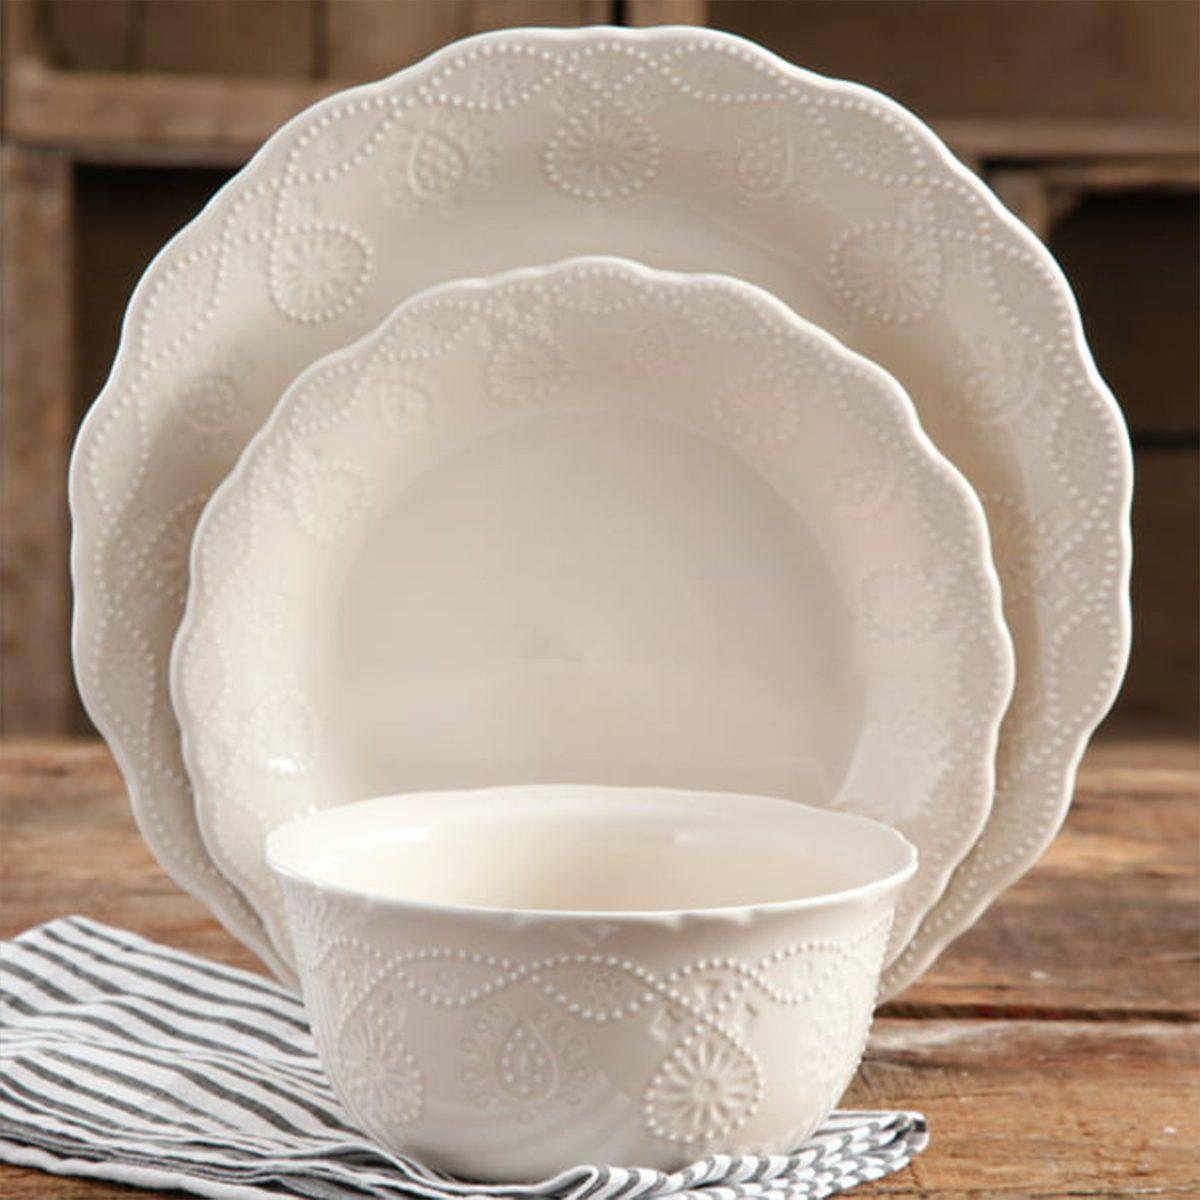 The Pioneer Woman Set of 3 10-inch Salad Bowls in Assorted Patterns 